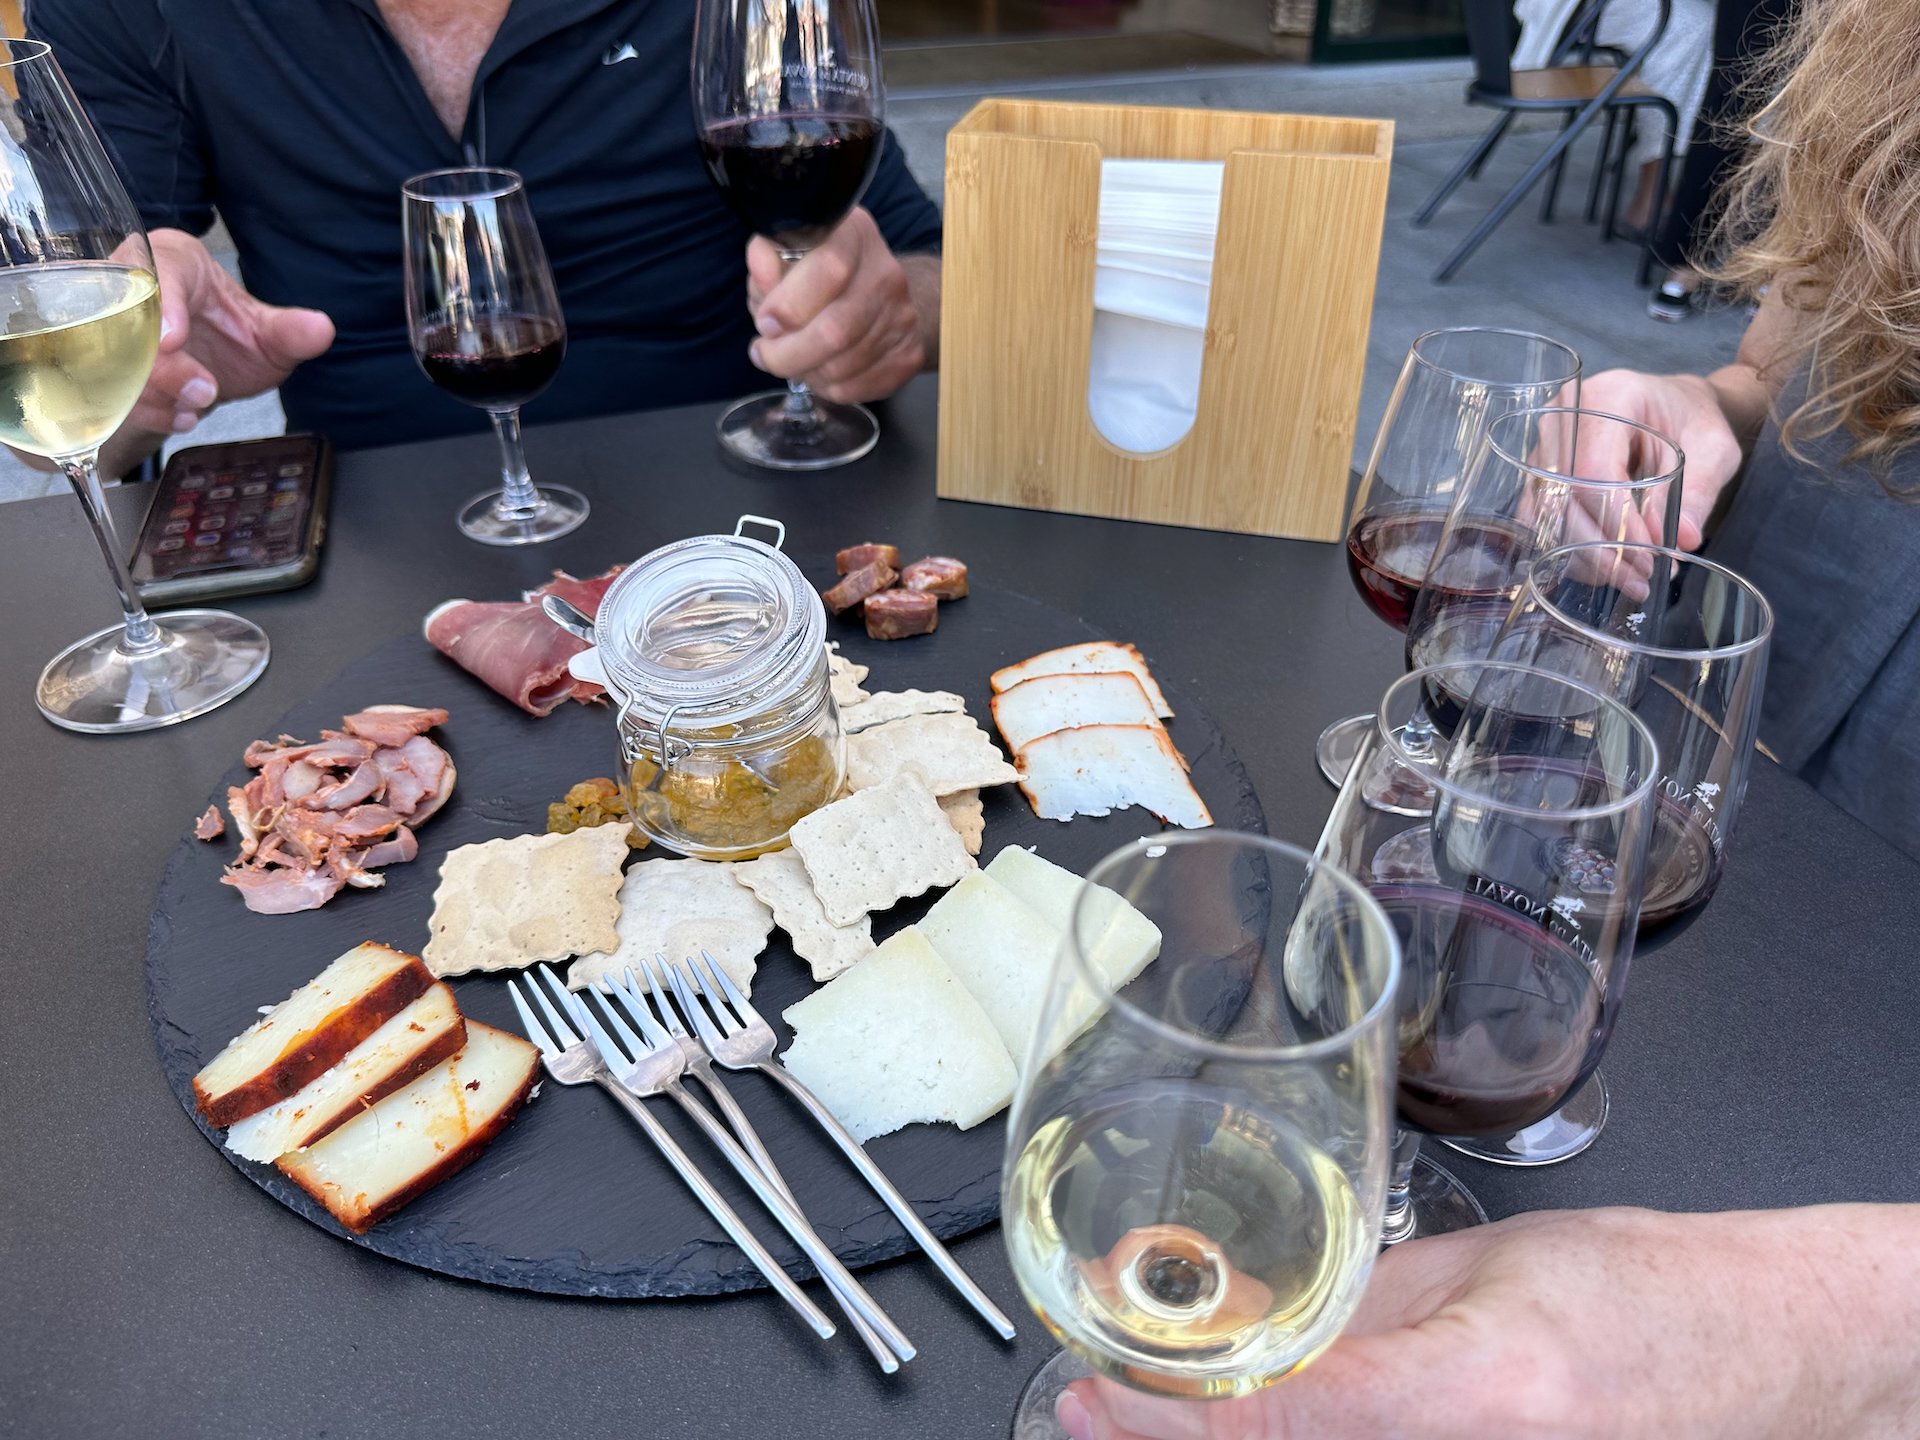  We had a nice little tasting board to go along with our wine. 